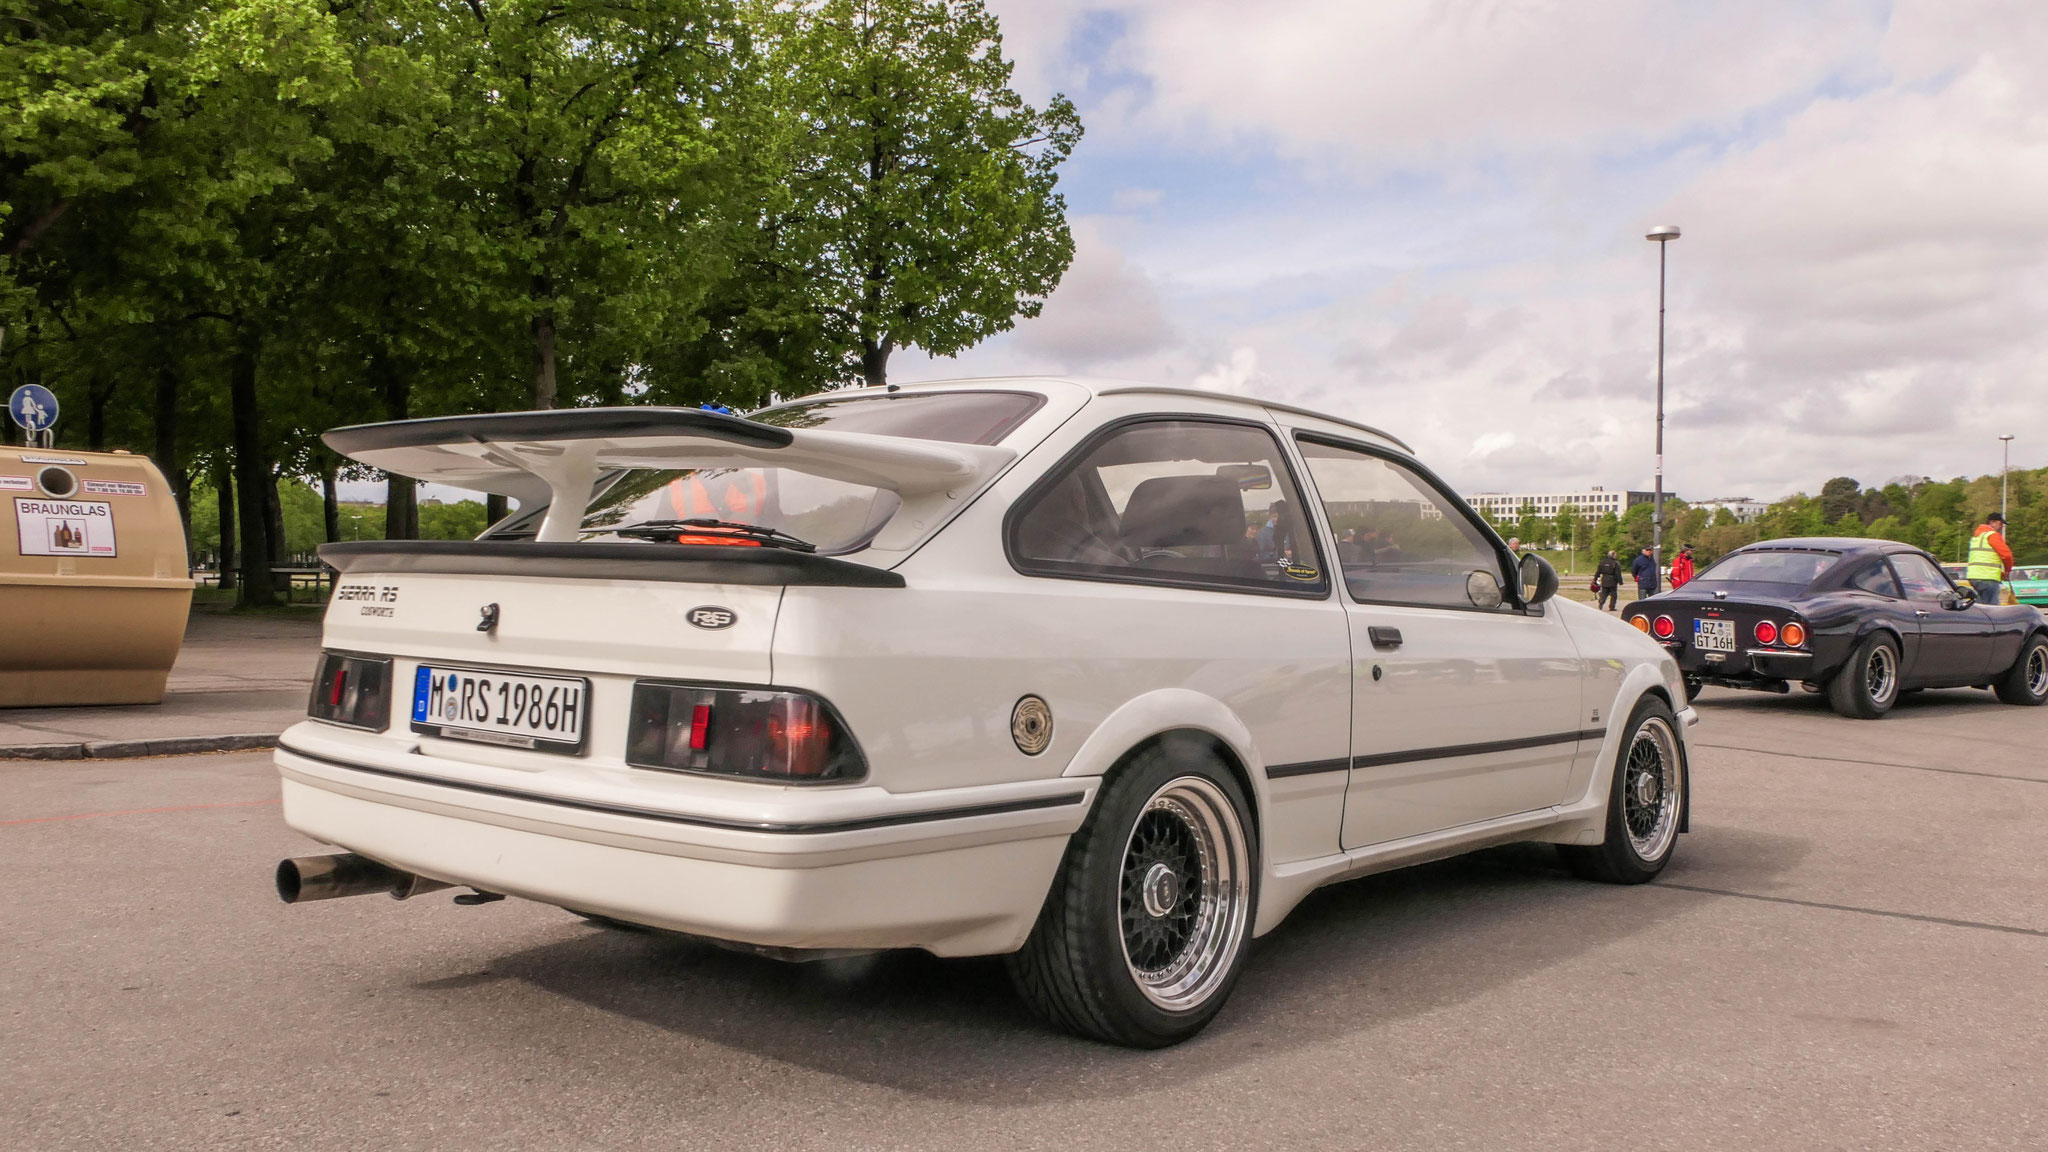 Ford Sierra RS Cosworth - M-RS1986H